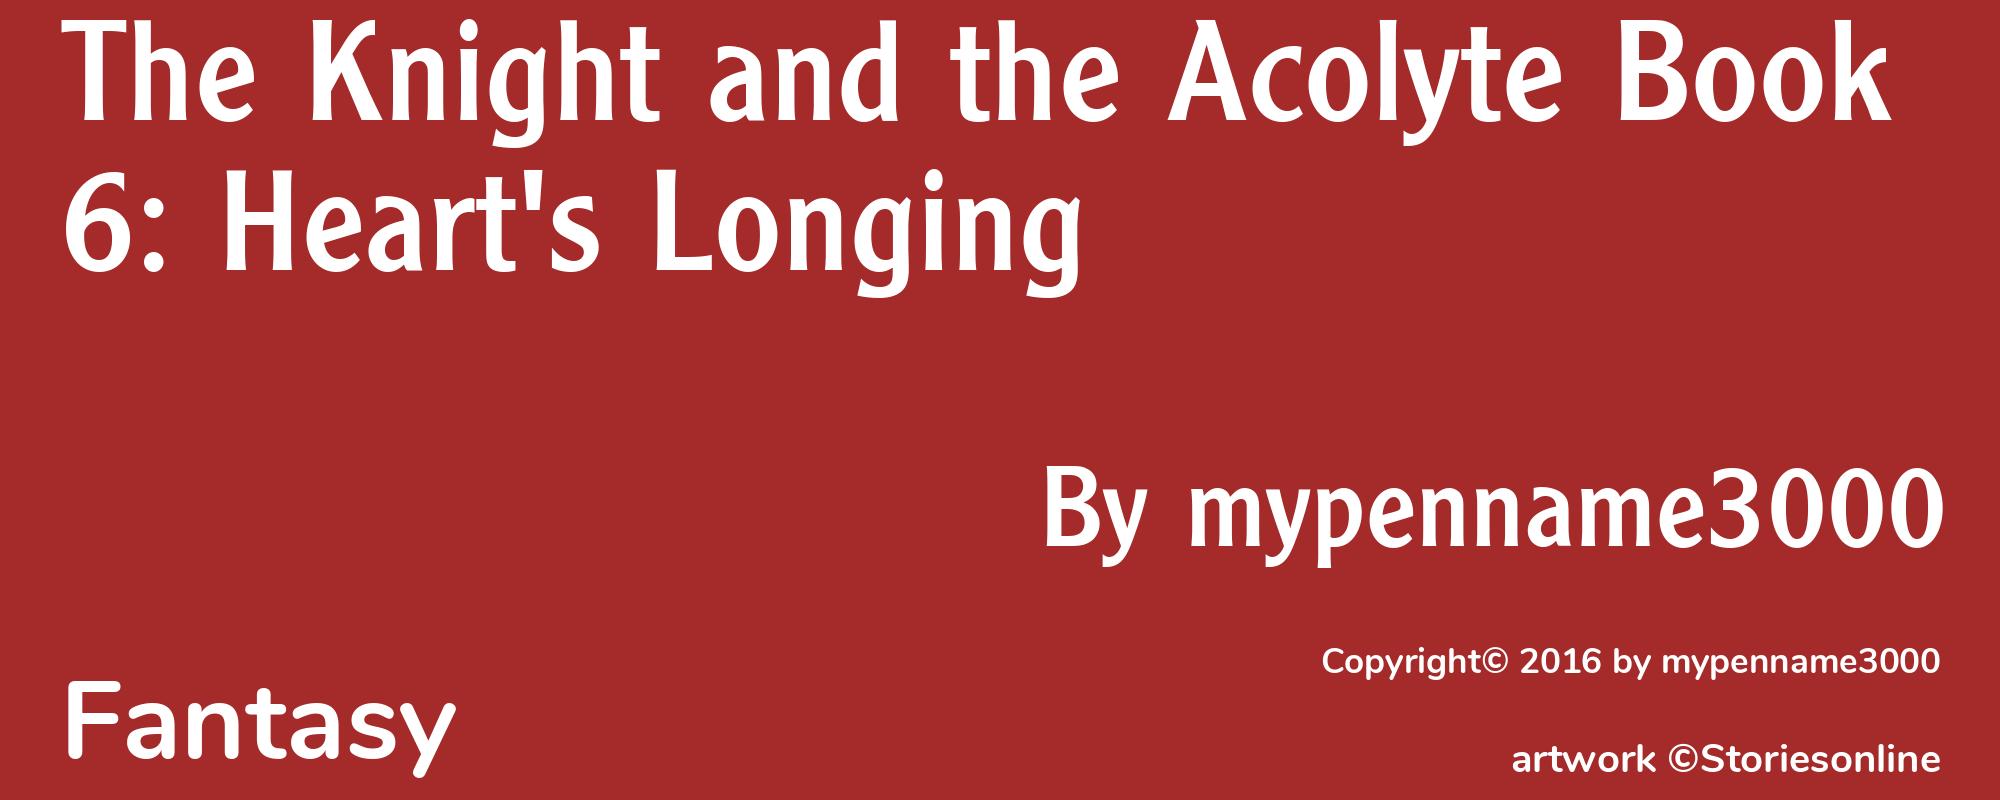 The Knight and the Acolyte Book 6: Heart's Longing - Cover